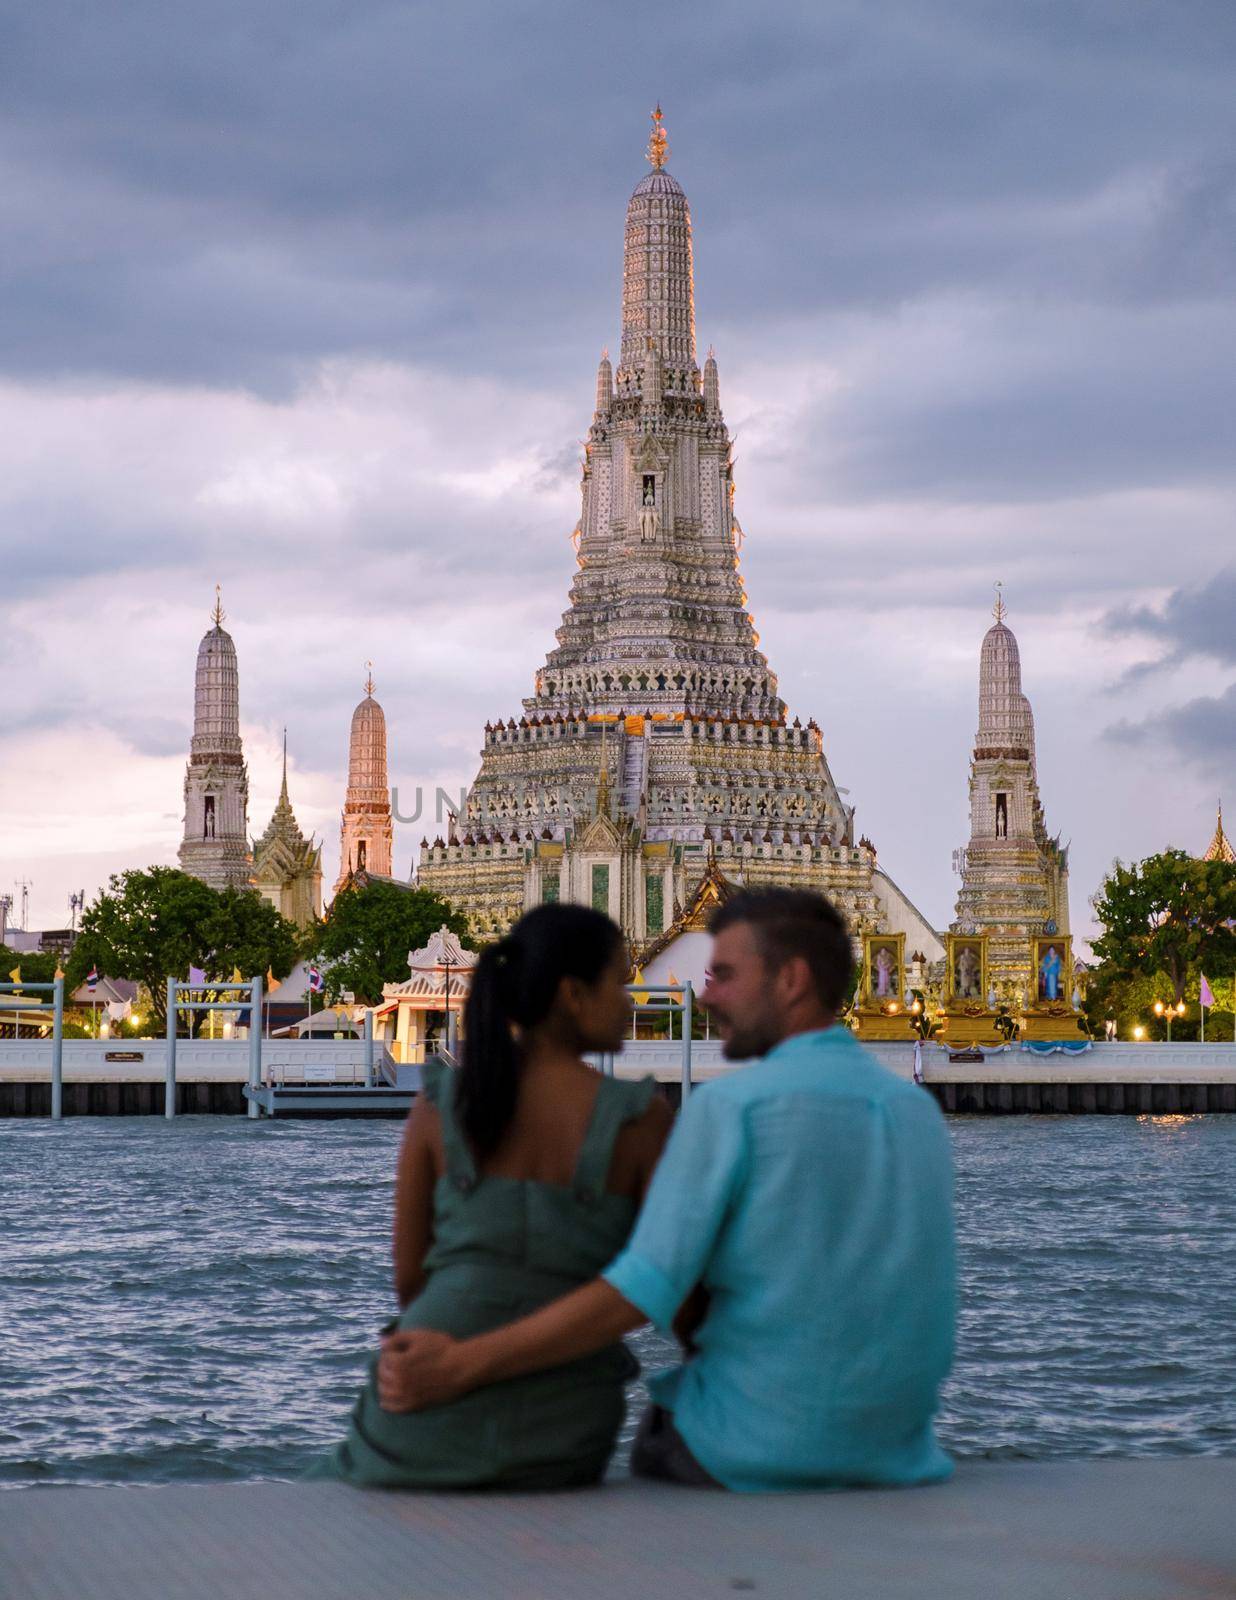 Out of focus blur couple of Asian women and European men watching the sunset at Wat Arun temple in Bangkok Thailand, Temple of Dawn, Buddhist temple alongside the Chao Phraya River.